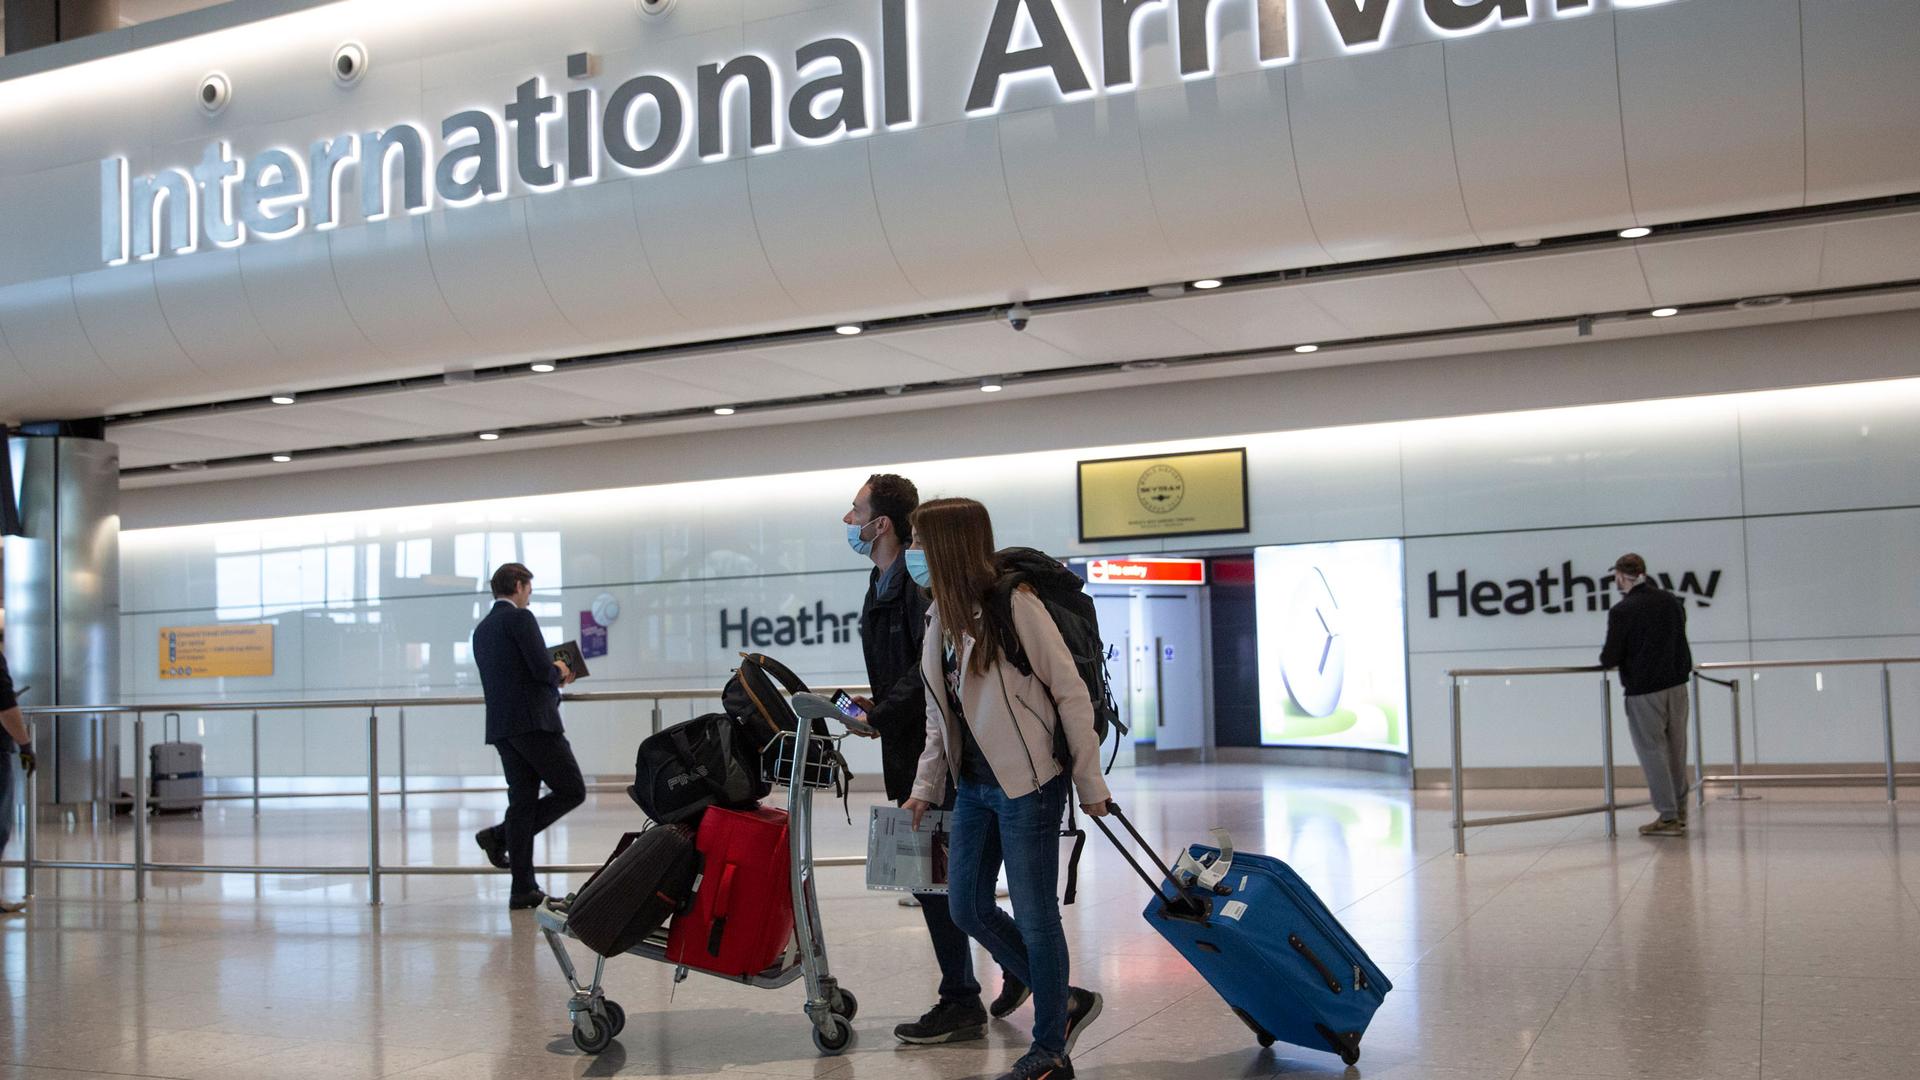 A pair of travelers are shown walking in the International Arrivals section of London's Heathrow Airport with one person pushing a cart carrying several bags.